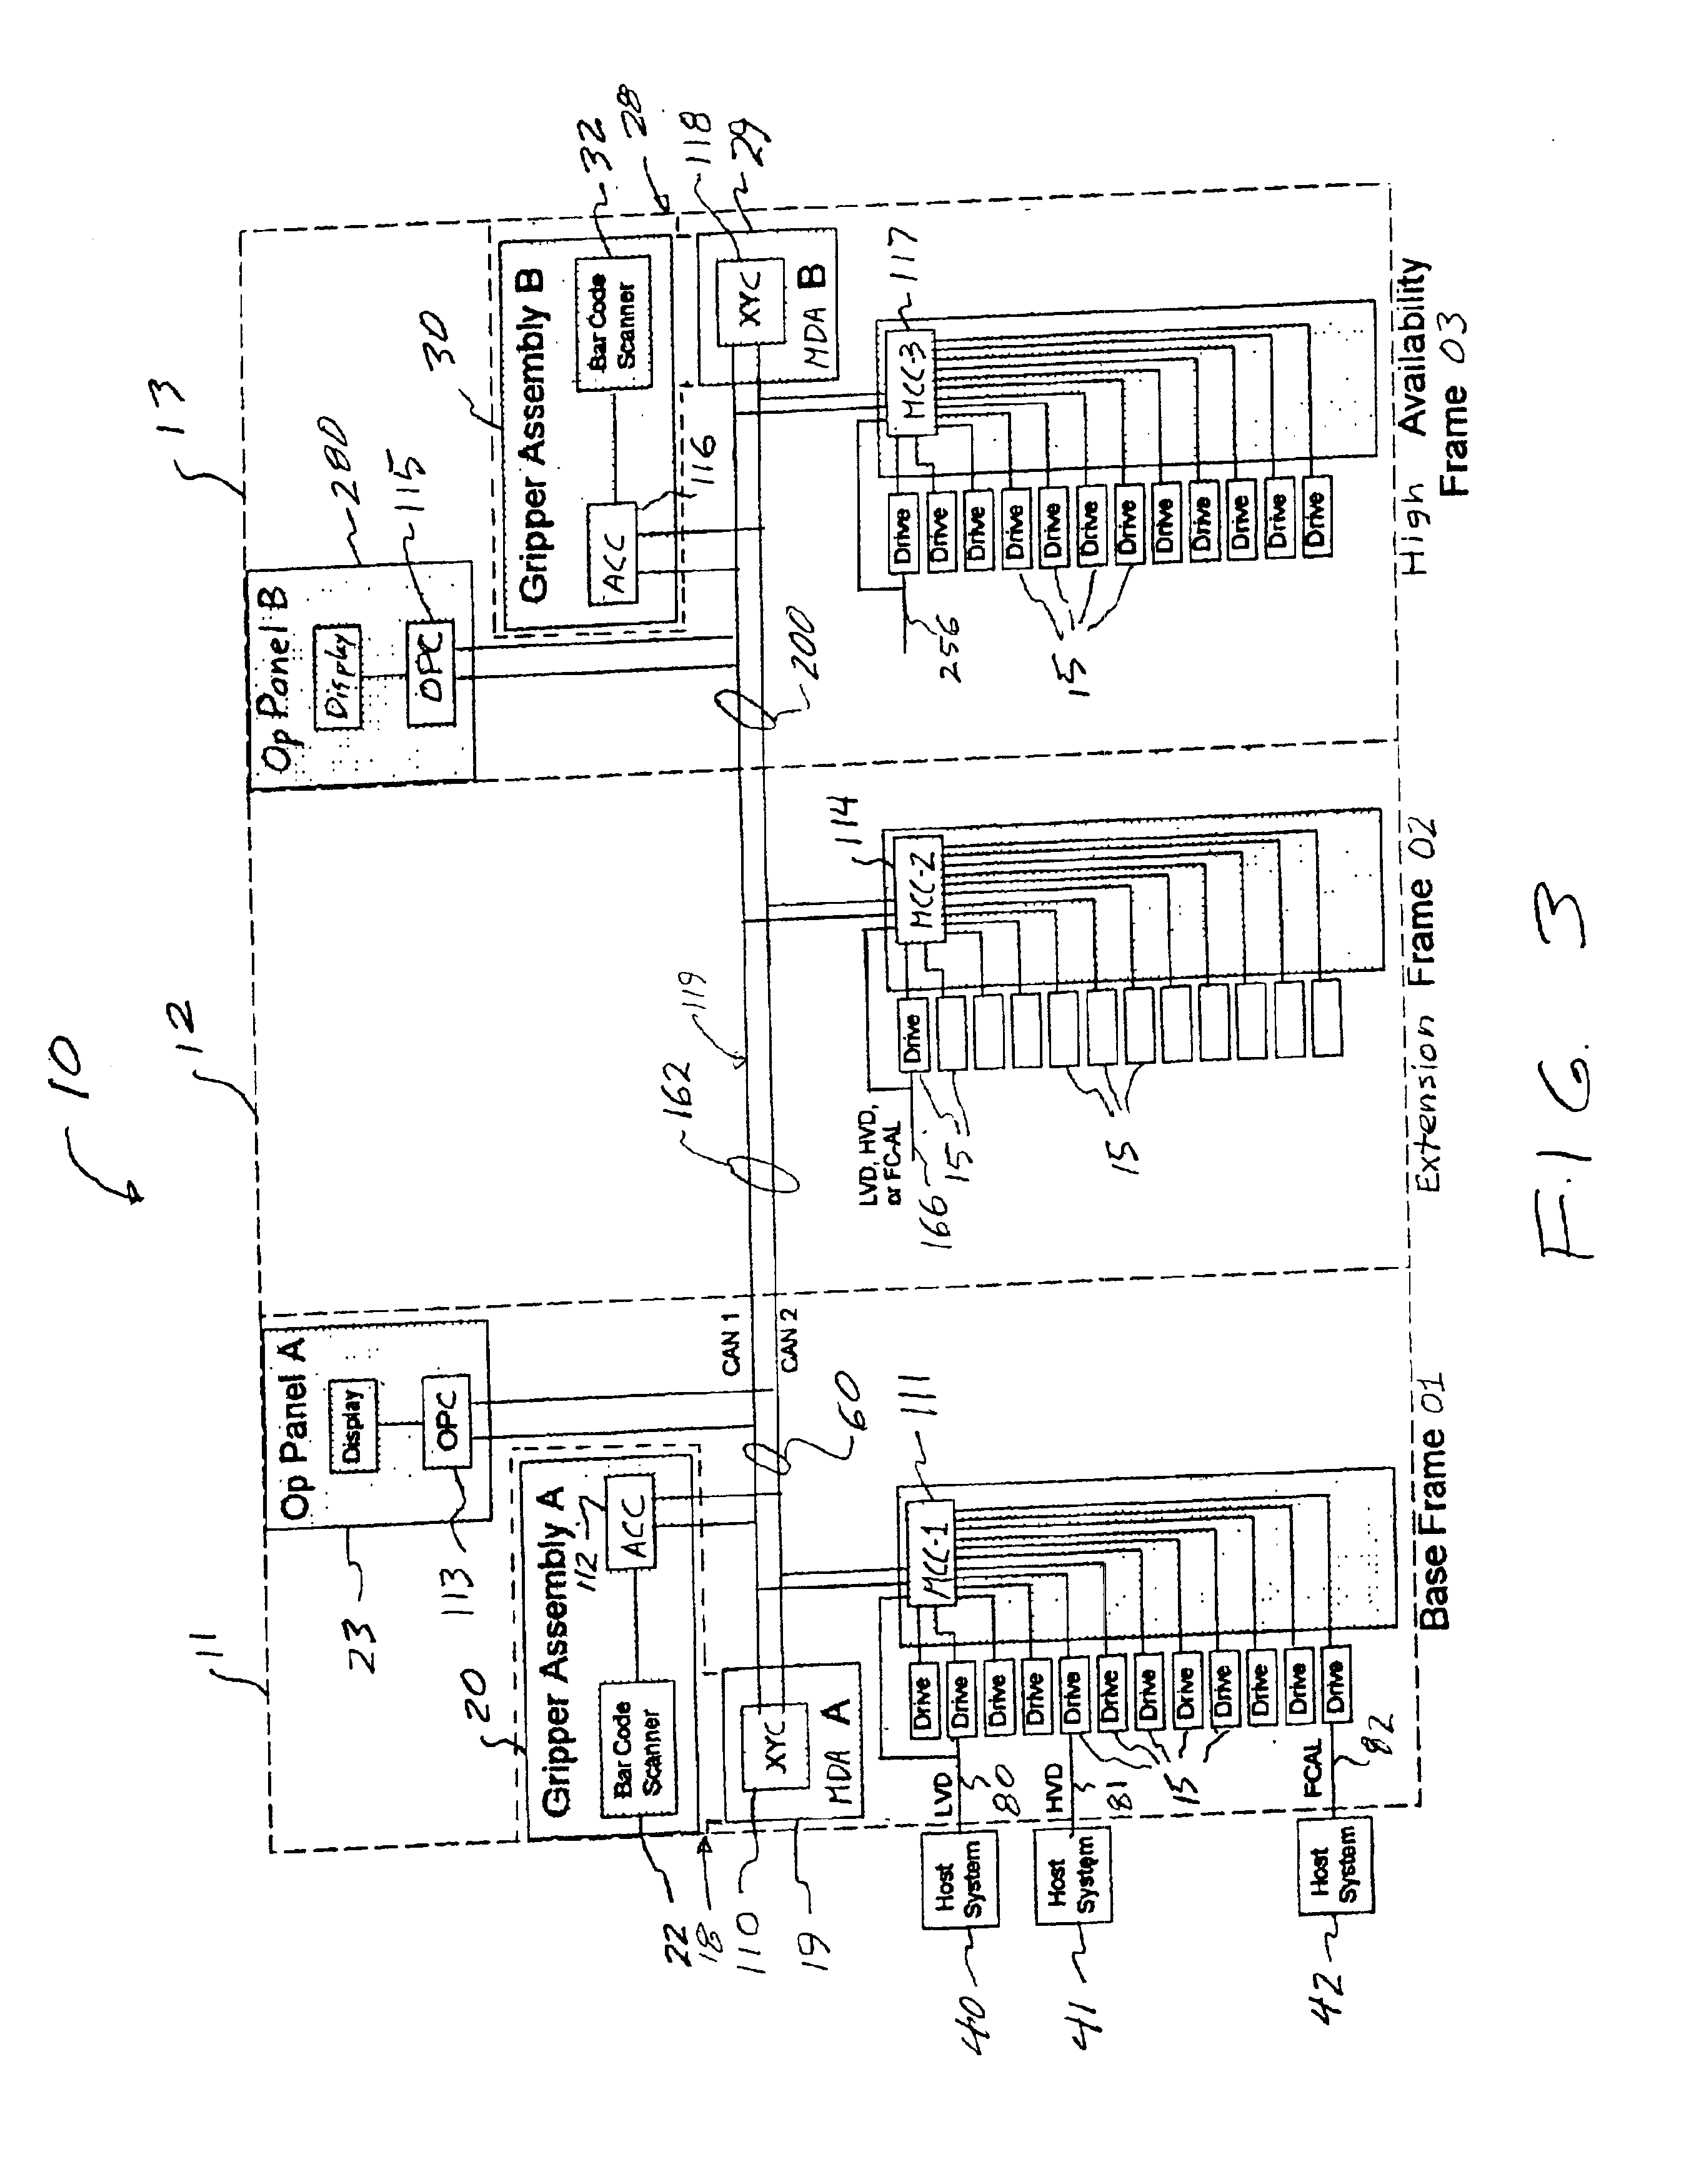 Failure isolation in a distributed processing system employing relative location information